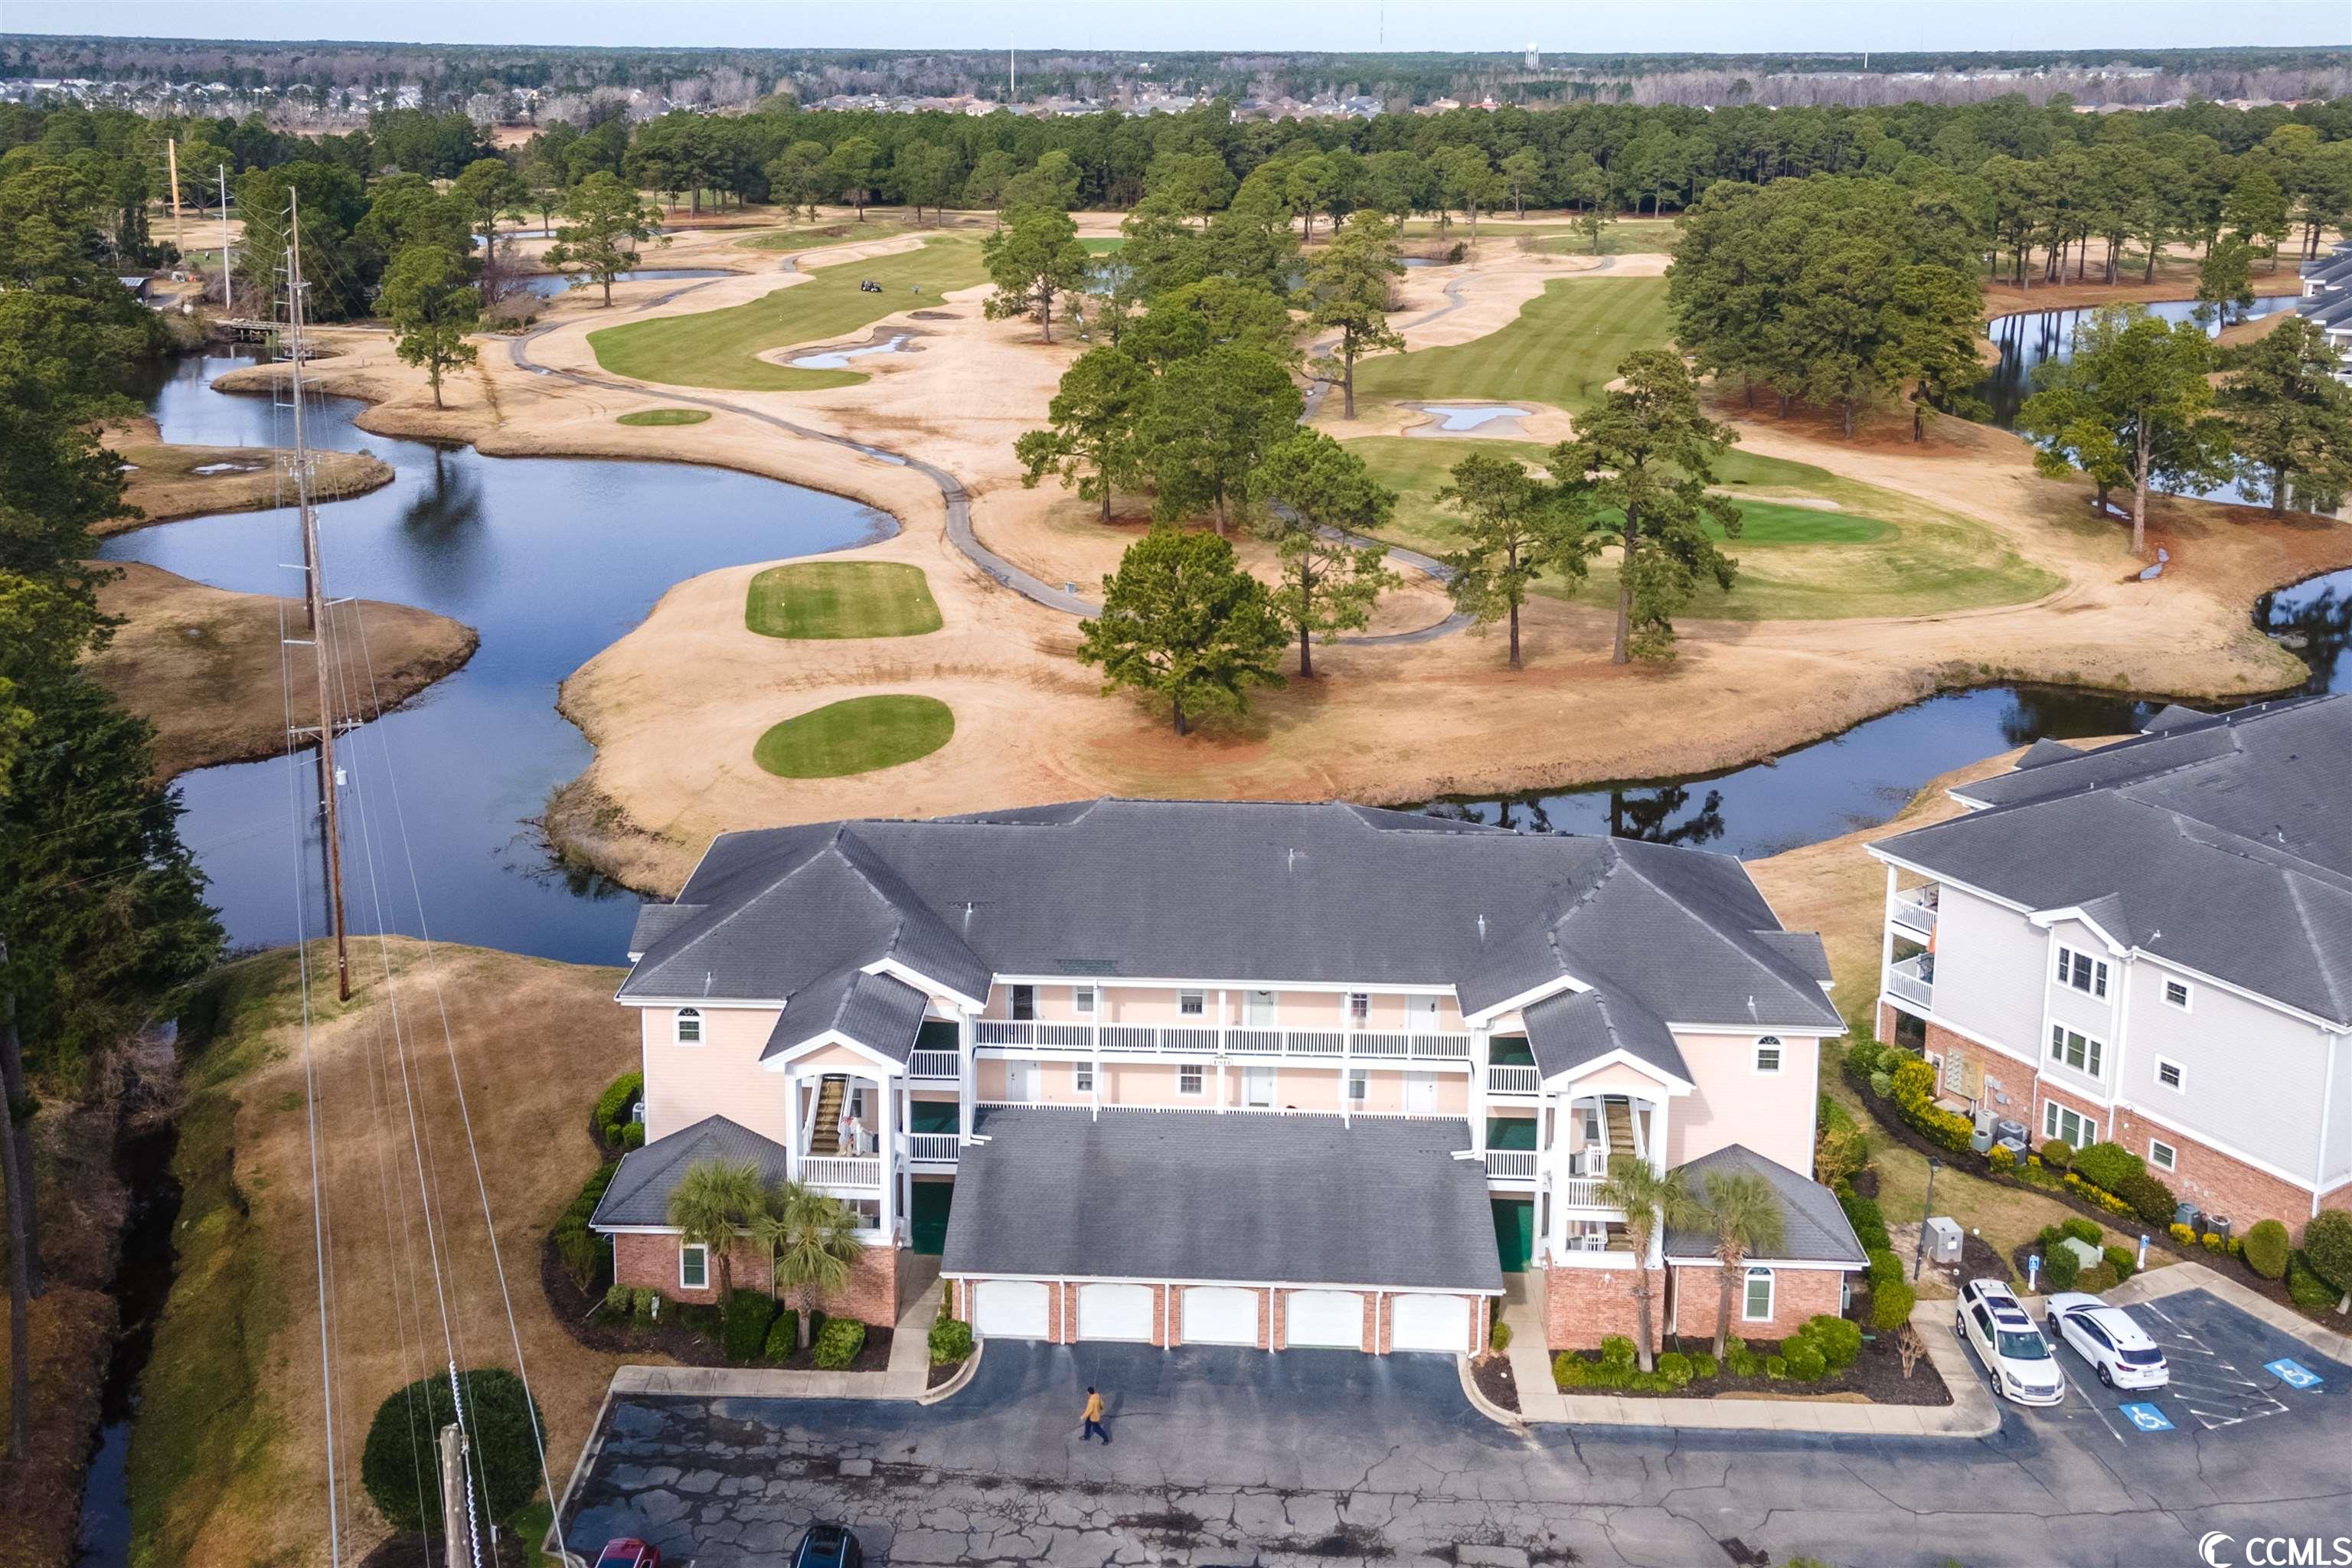 if you are looking for a turnkey, fully furnished, condo with the best golf course view in myrtle beach, this is it!  as you enter, you'll be greeted by an open concept living space adorned with abundant natural light, showcasing the panoramic vistas that stretch across the lush fairways of the myrtlewood golf course. the living room seamlessly connects to a private balcony, providing an idyllic setting to sip your morning coffee or unwind with a glass of wine while taking in the tranquil scenes of the golf course and water features.  magnolia north offers not only a residence but also a lifestyle where every day feels like a vacation.  it is conveniently located near myrtle beach's sandy shores, finest attractions, restaurants, and entertainment options. don't miss the opportunity to make this golf condo your own – your dream lifestyle awaits!